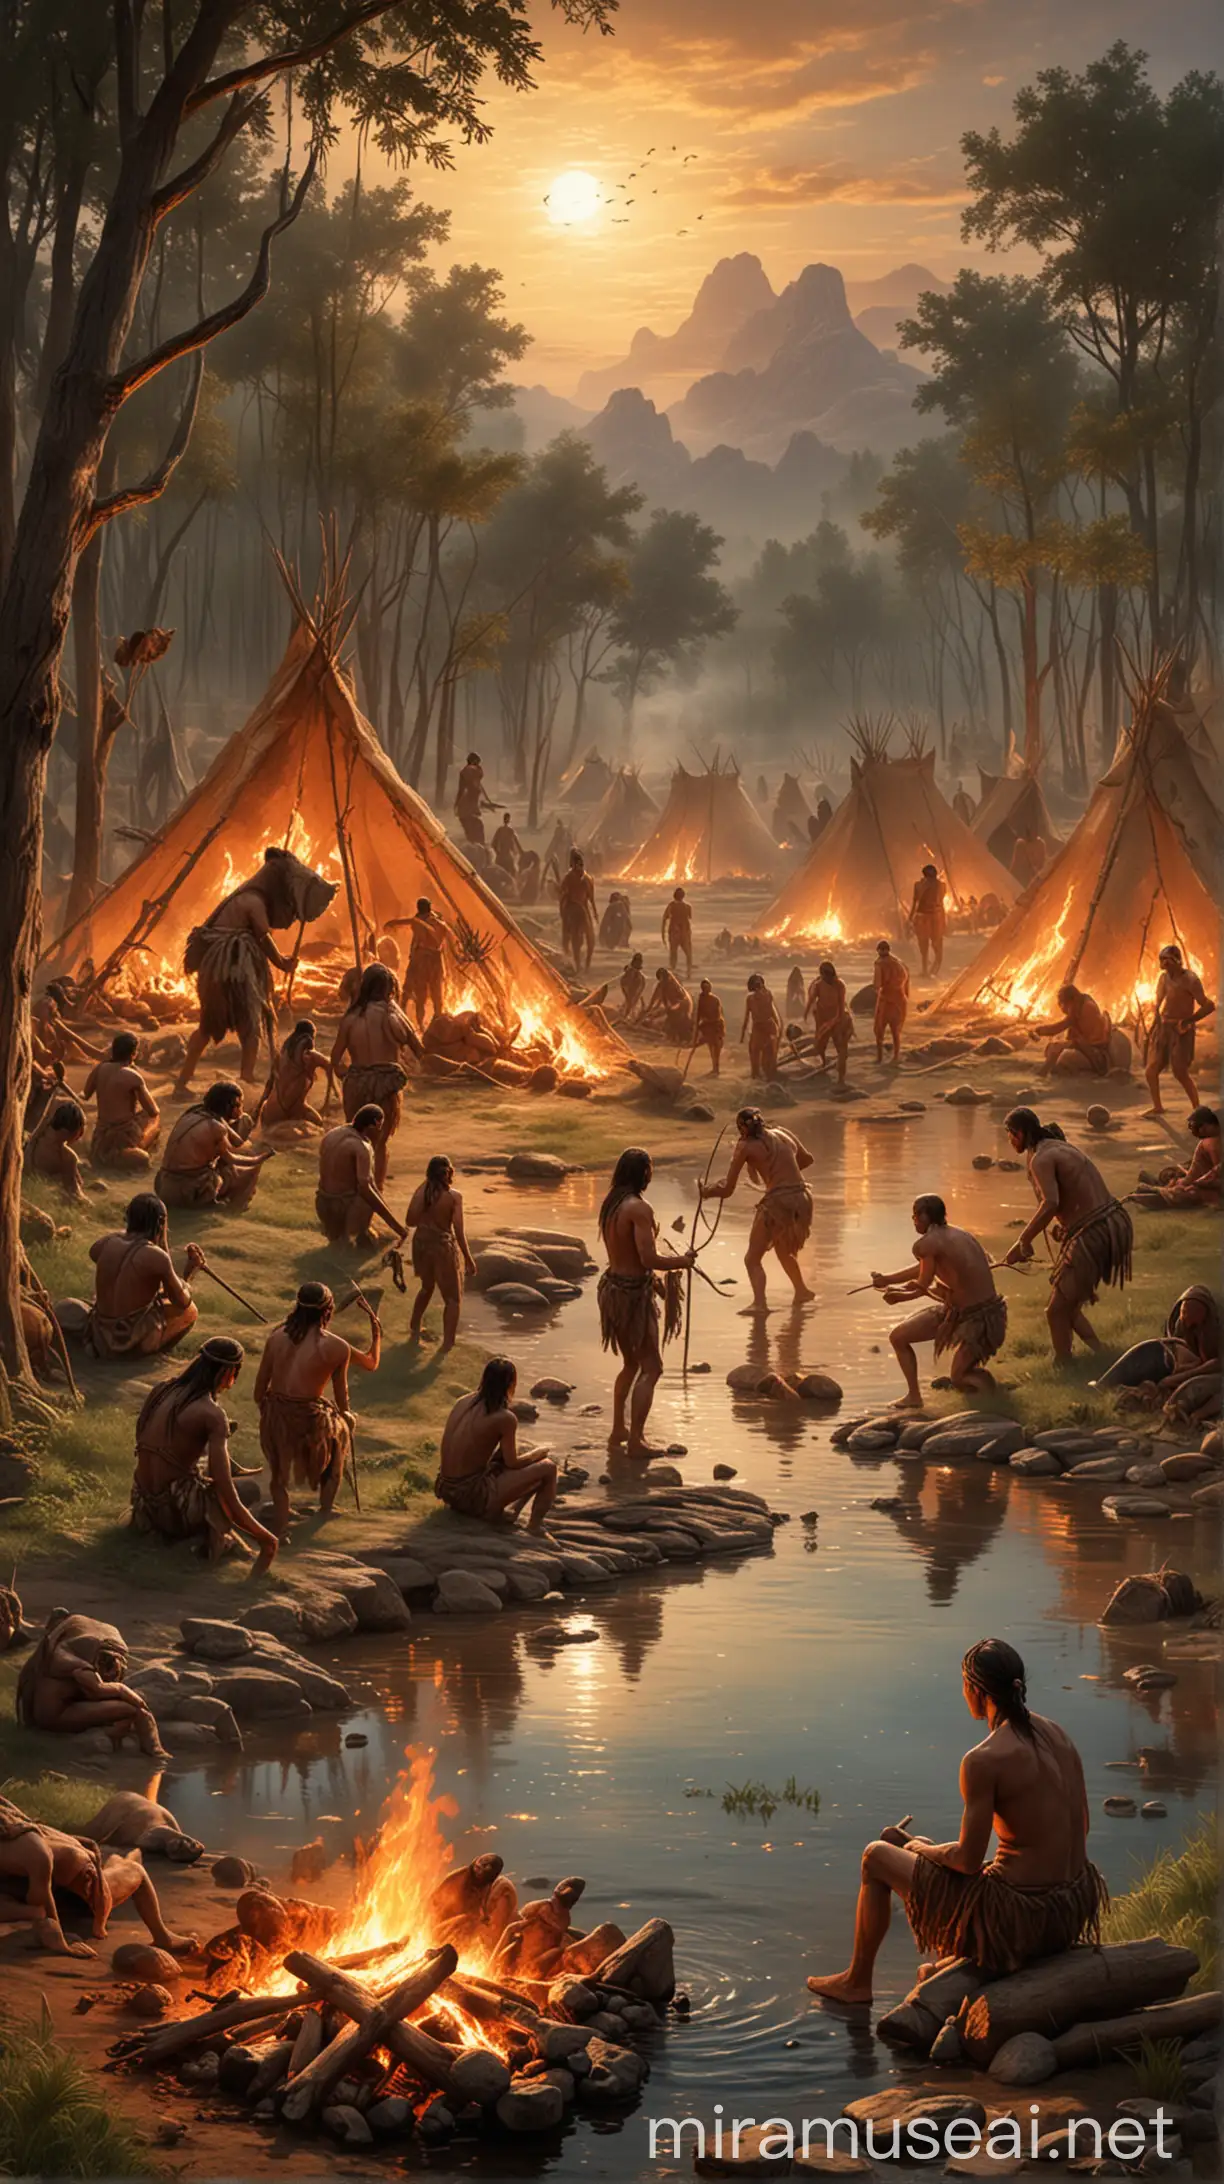 An artistic depiction of an ancient hunter-gatherer community: People hunting, gathering water, and gathering around a fire.
